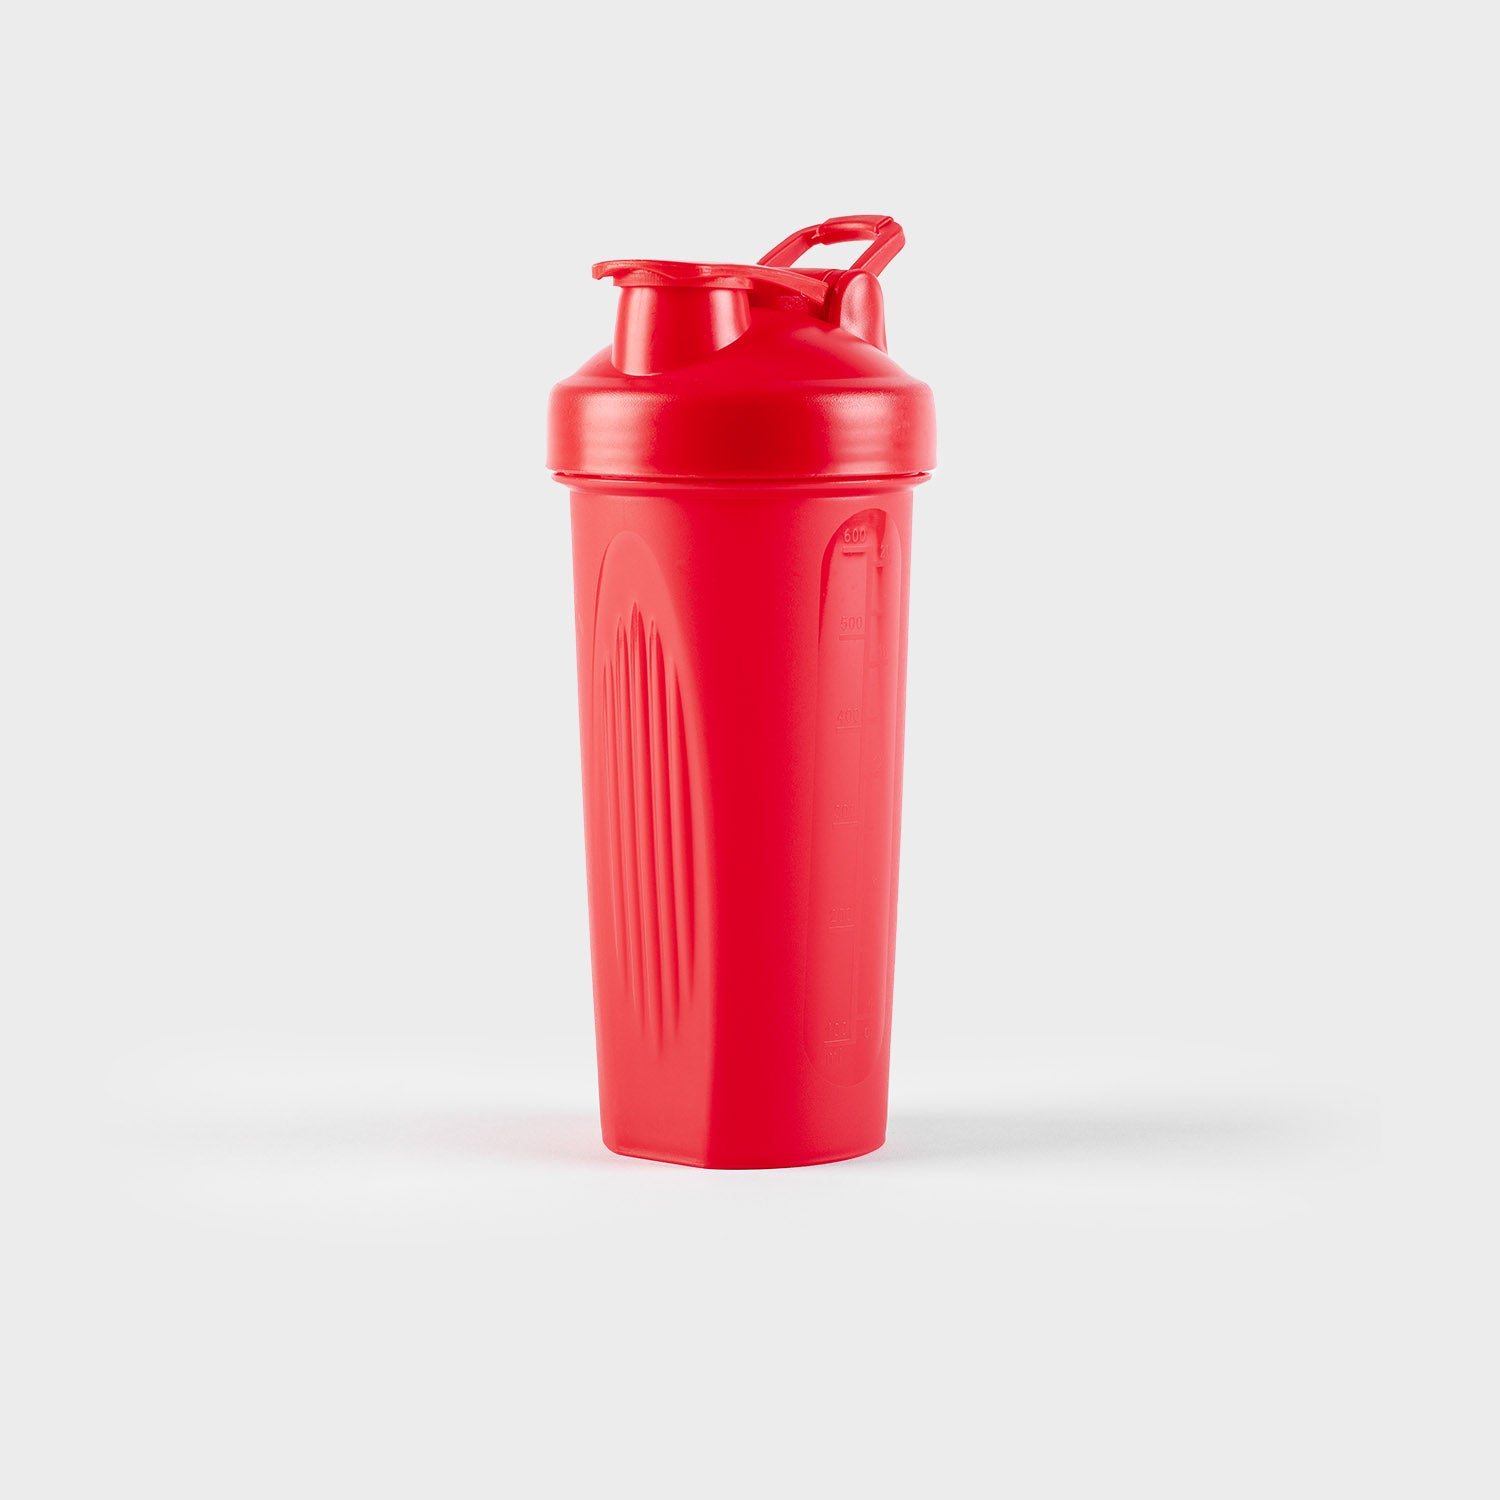 squatwolf-gym-wear-protein-shaker-red-workout